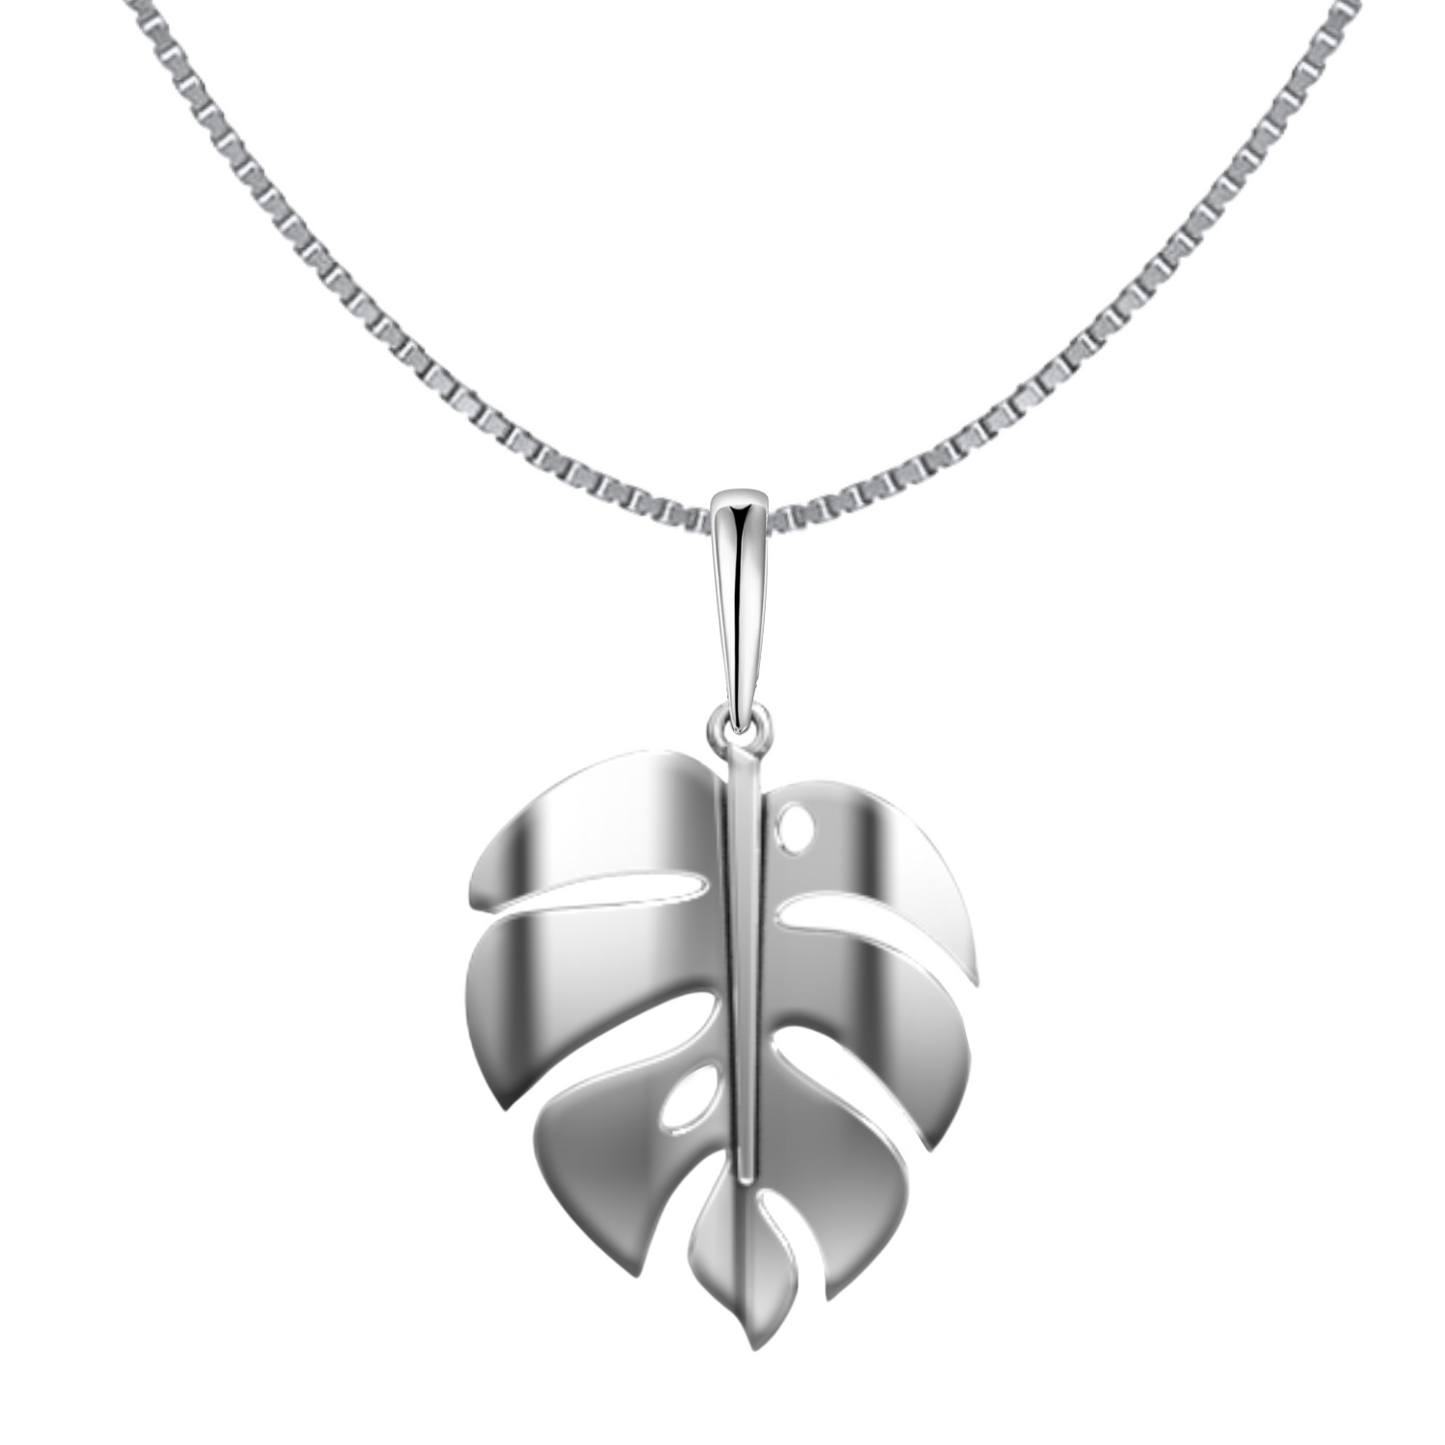 Leaf Pendant Necklace in 92.5 Silver